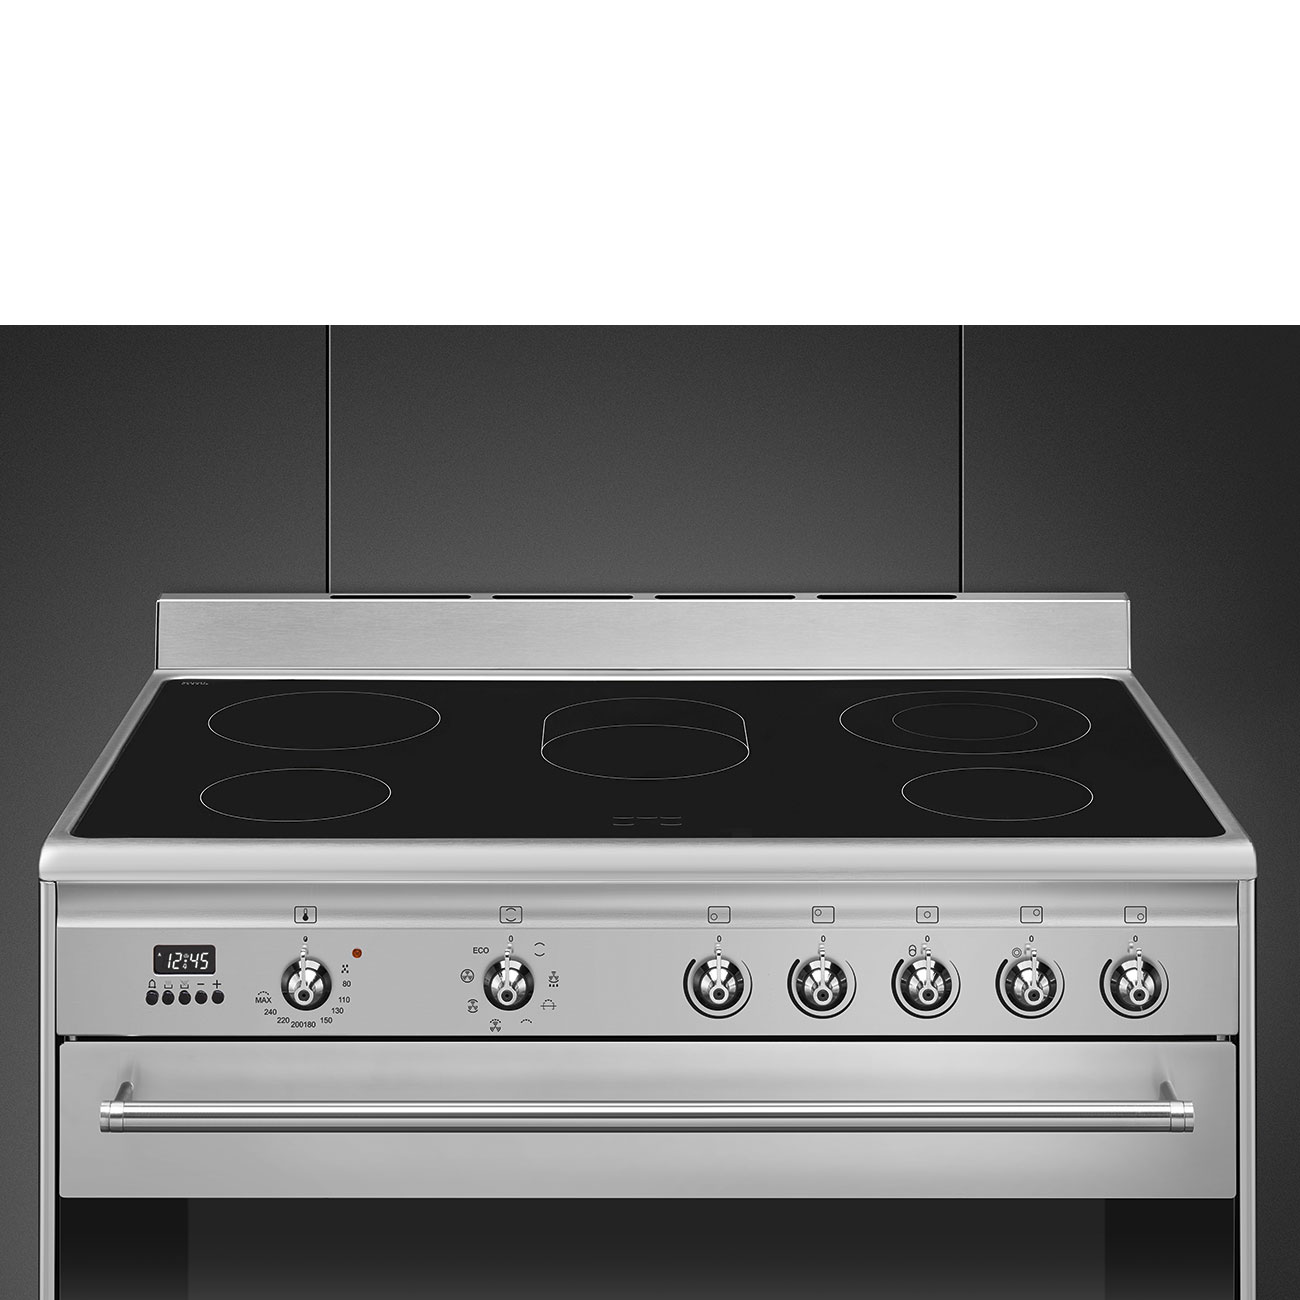 Smeg Stainless steel Cooker with Ceramic Hob_7